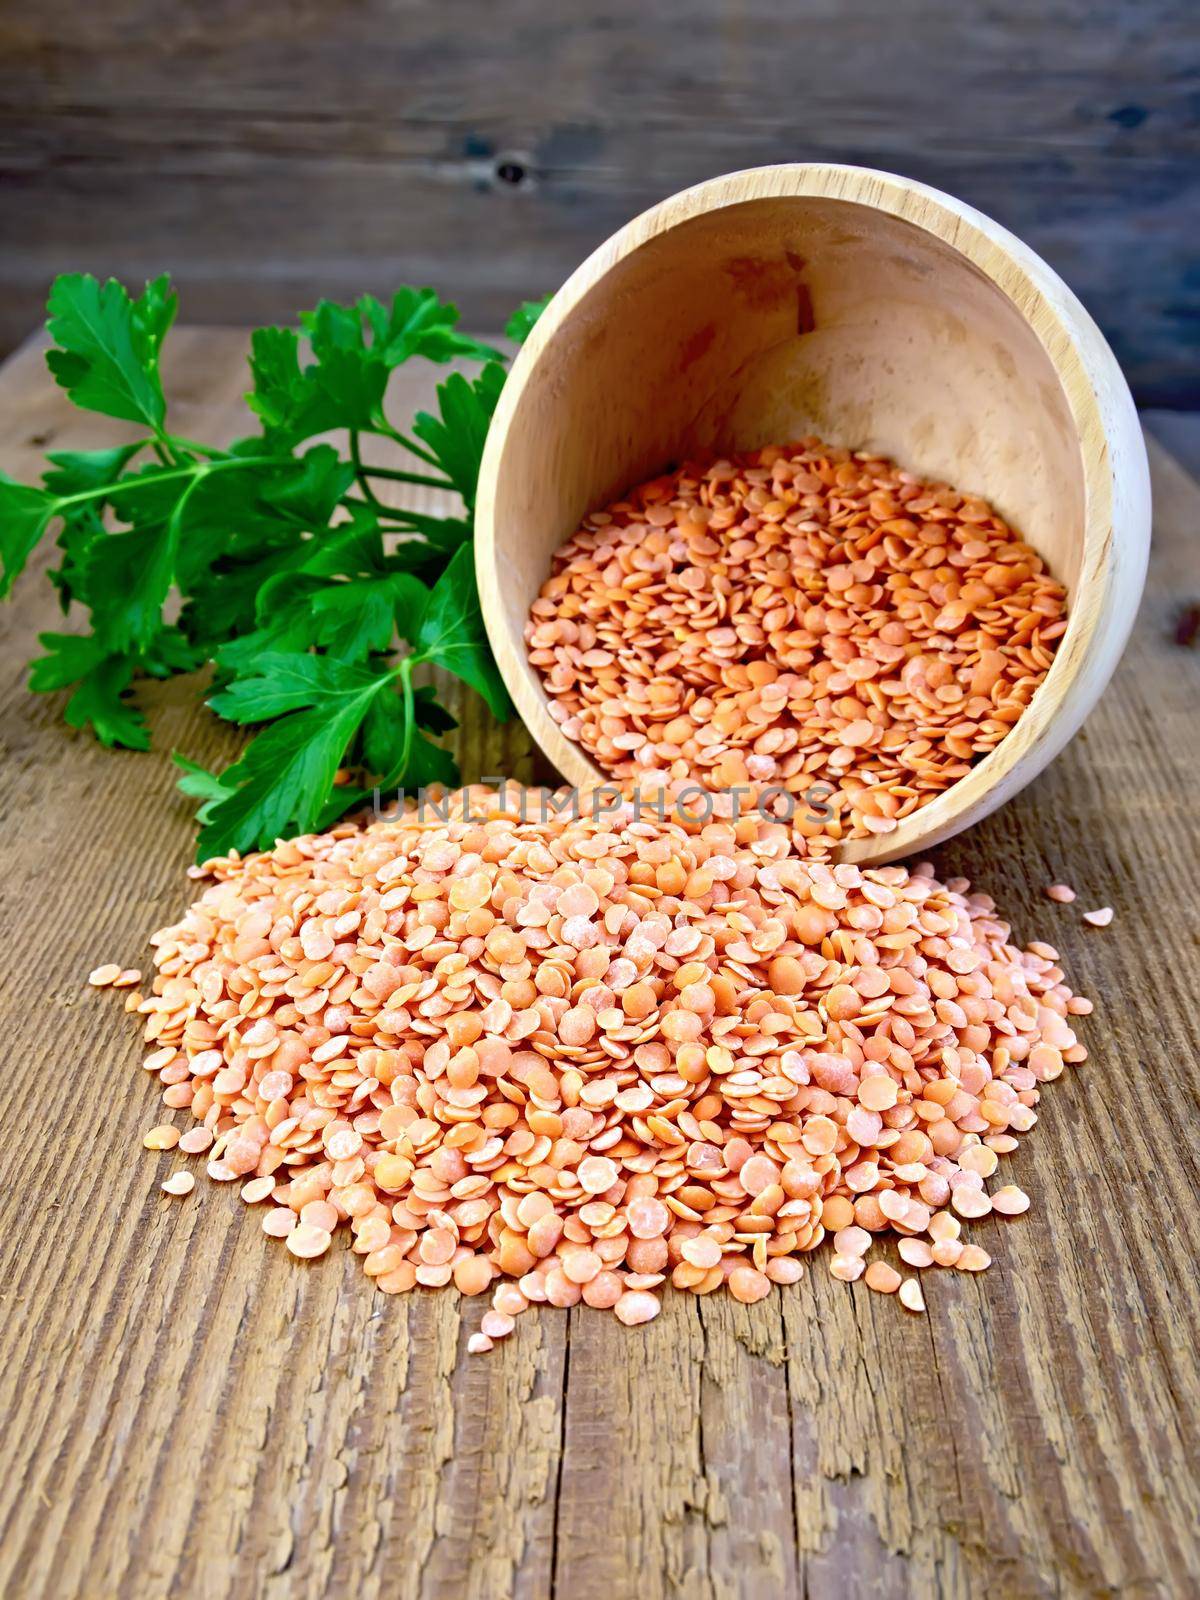 Red lentils in a wooden bowl, parsley on a wooden boards background